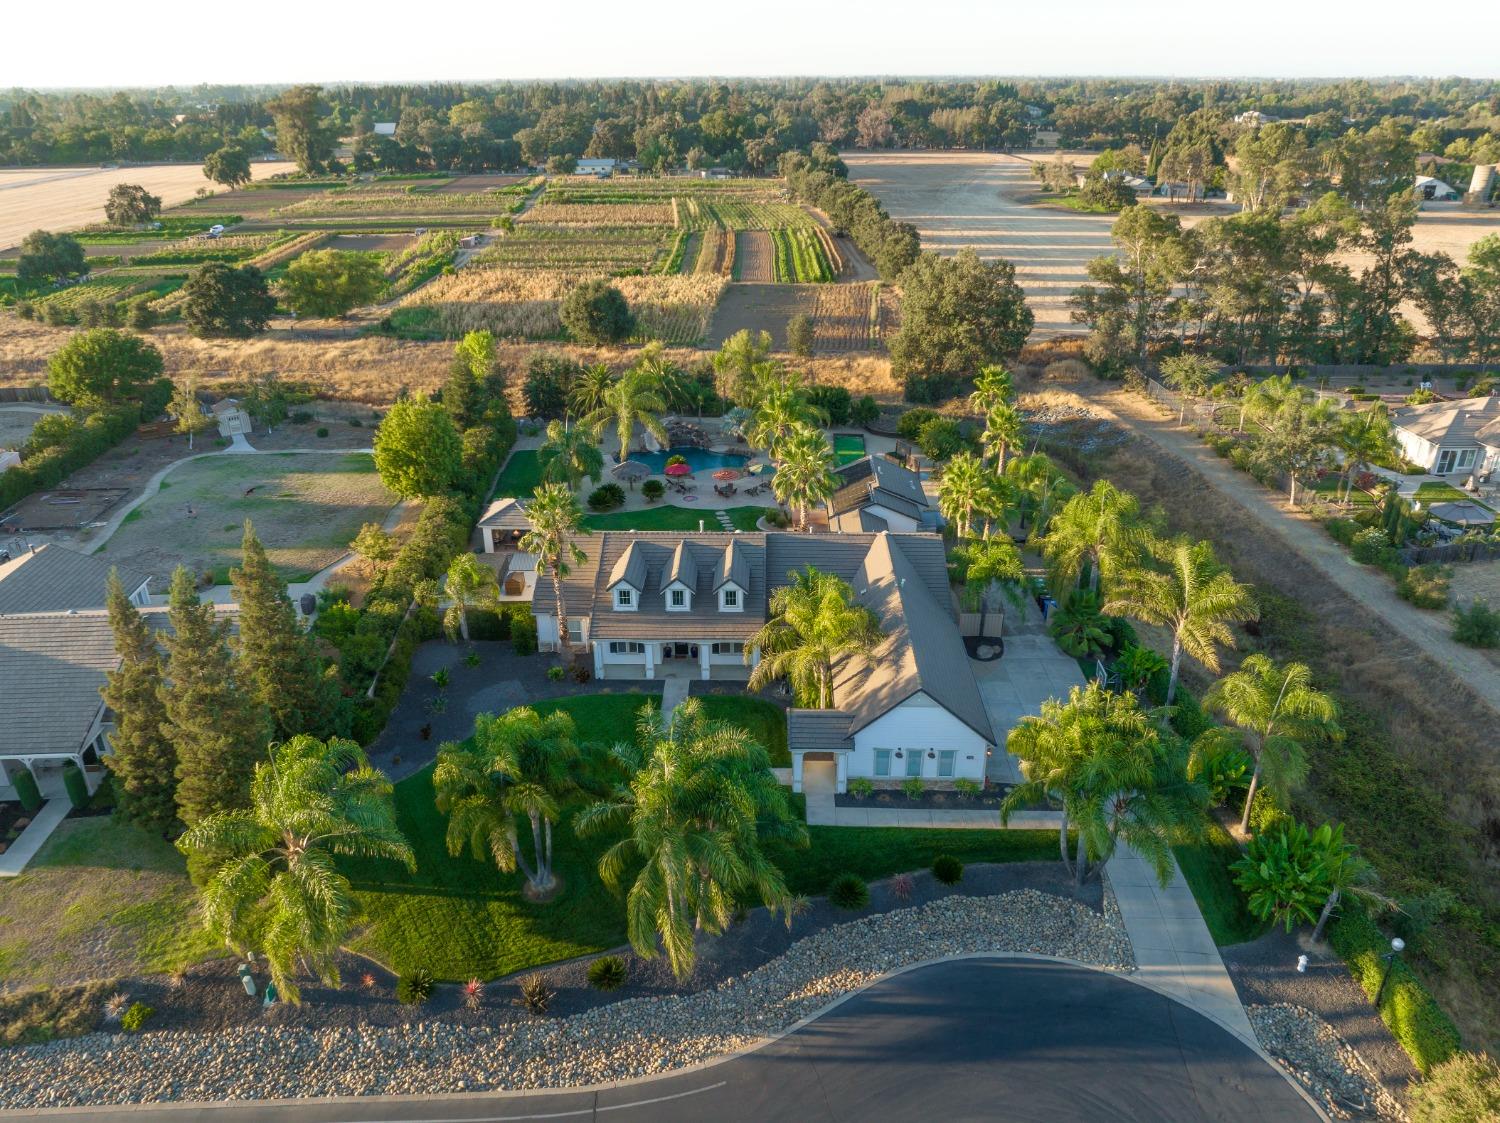 A five-car garage is nestled at this California estate.